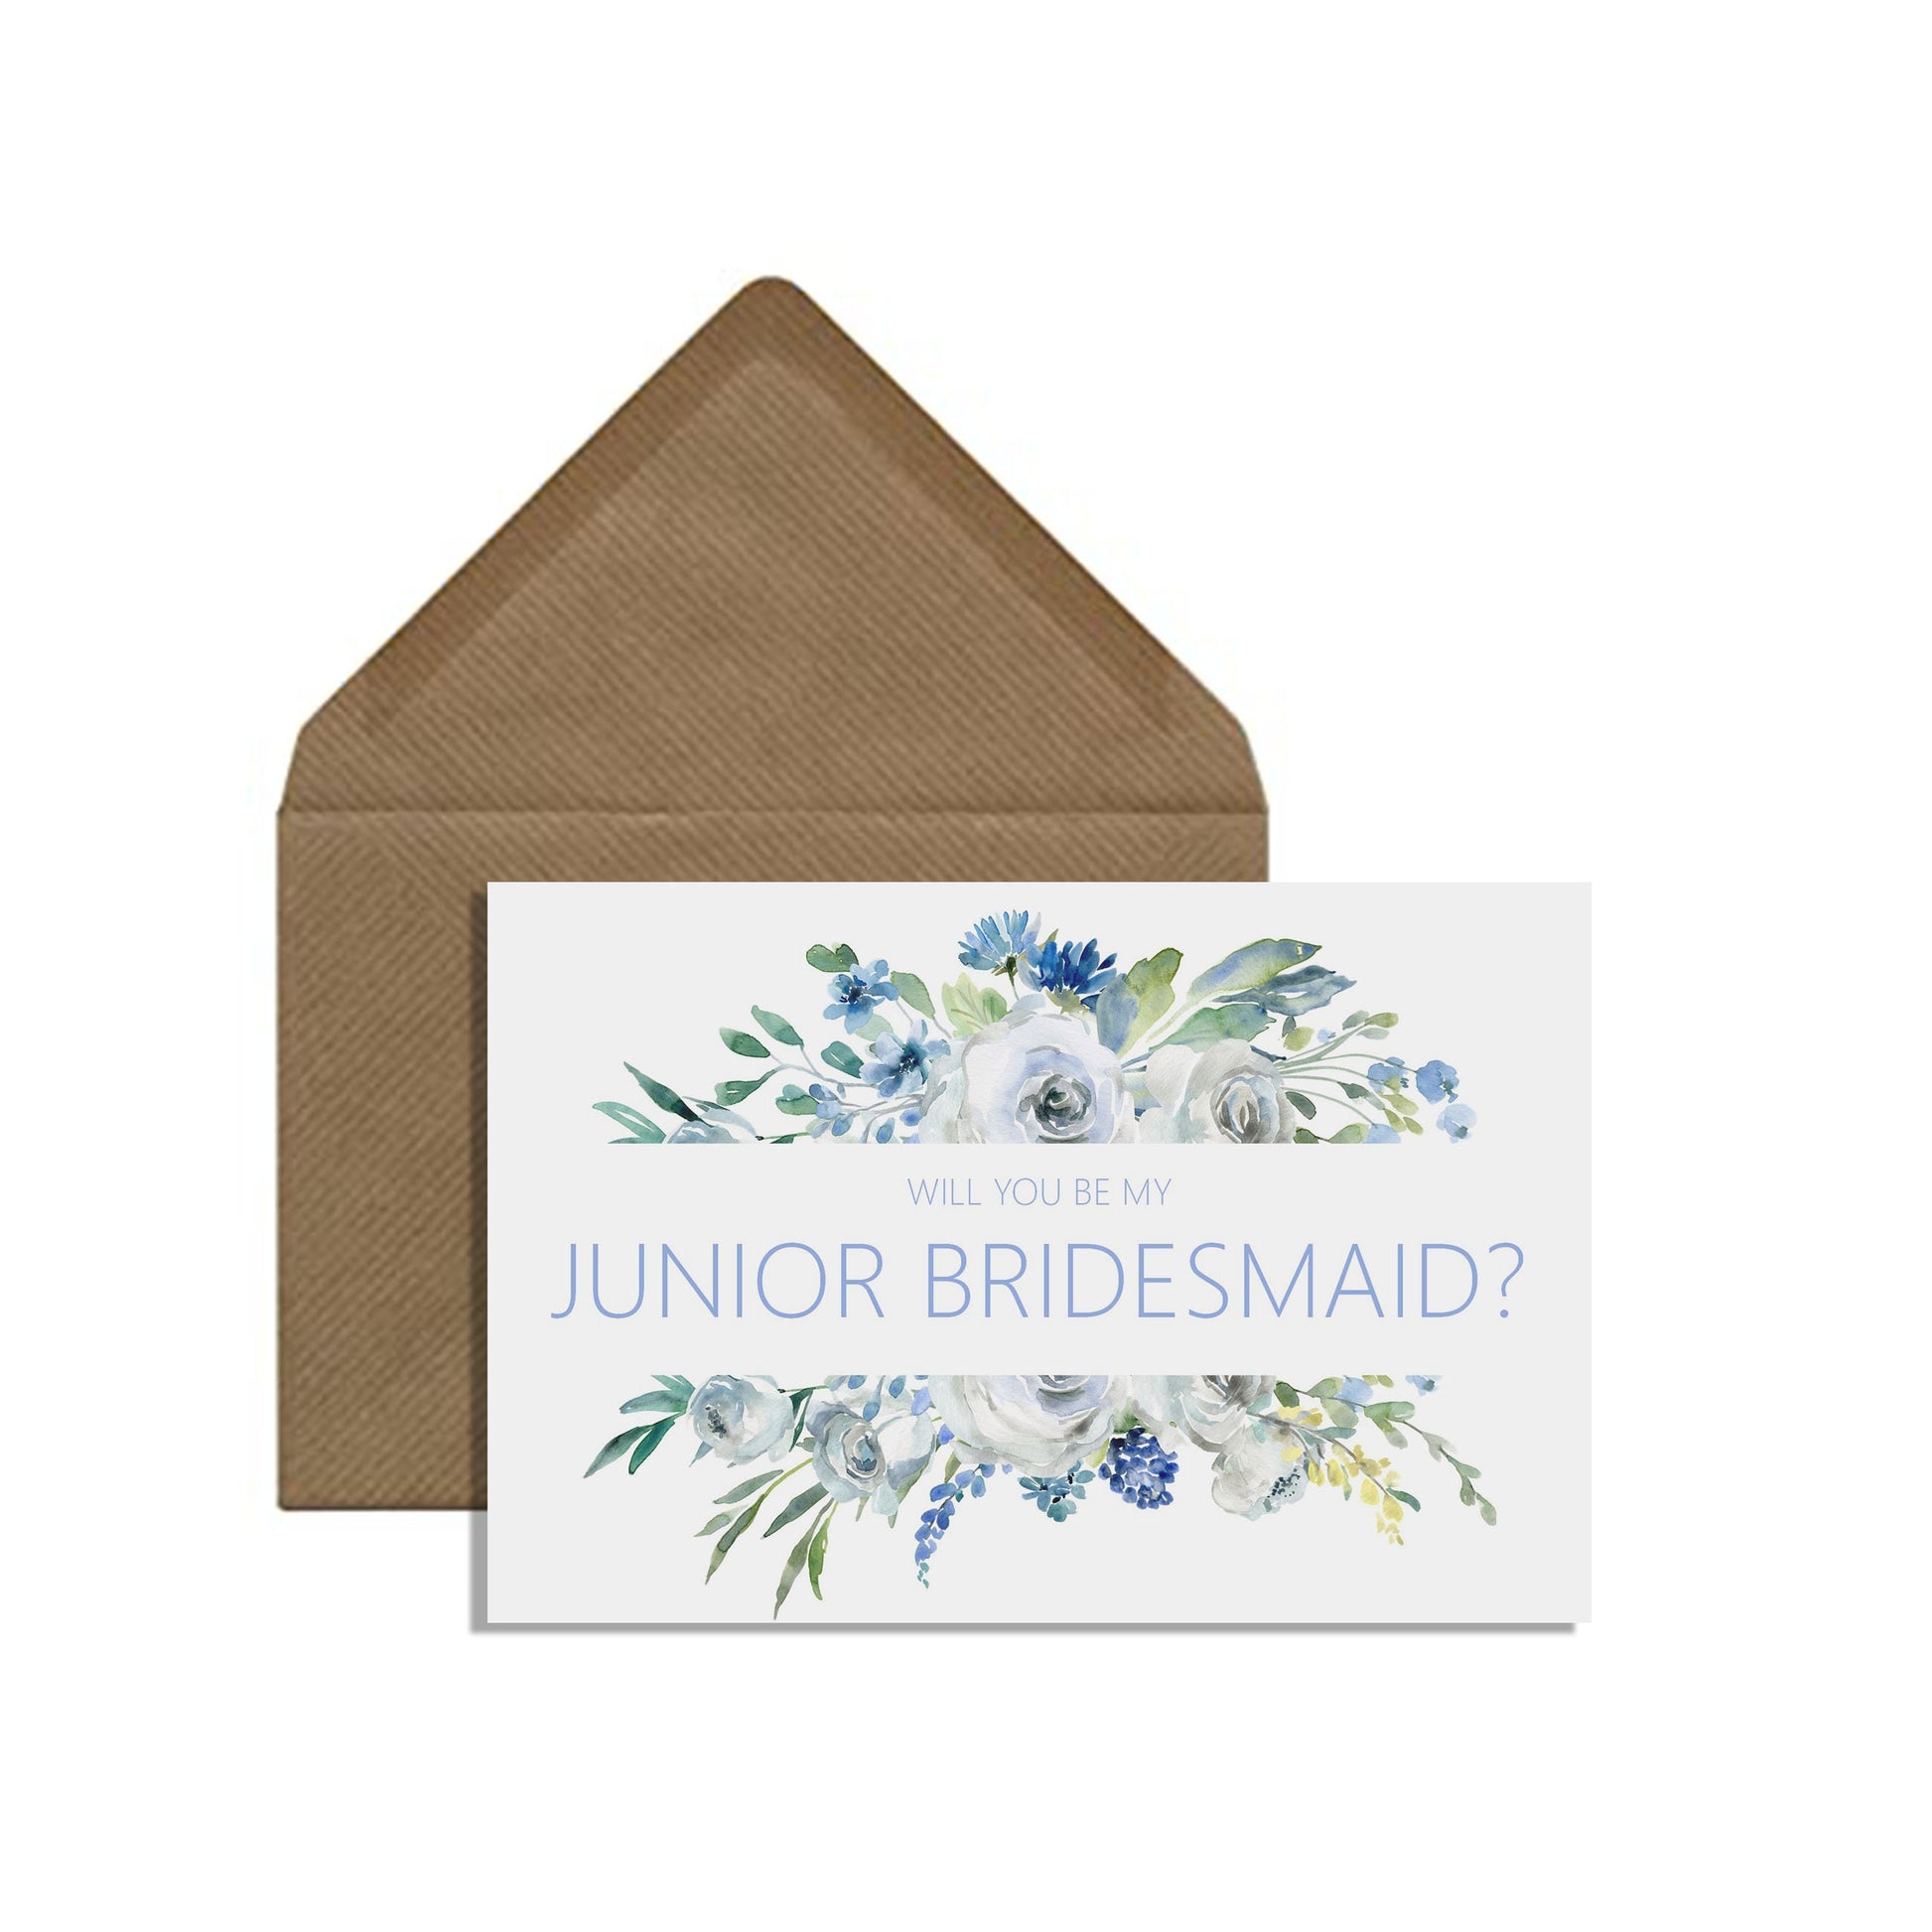 Will You Be My Junior Bridesmaid? Wedding Proposal Card - Blue Floral